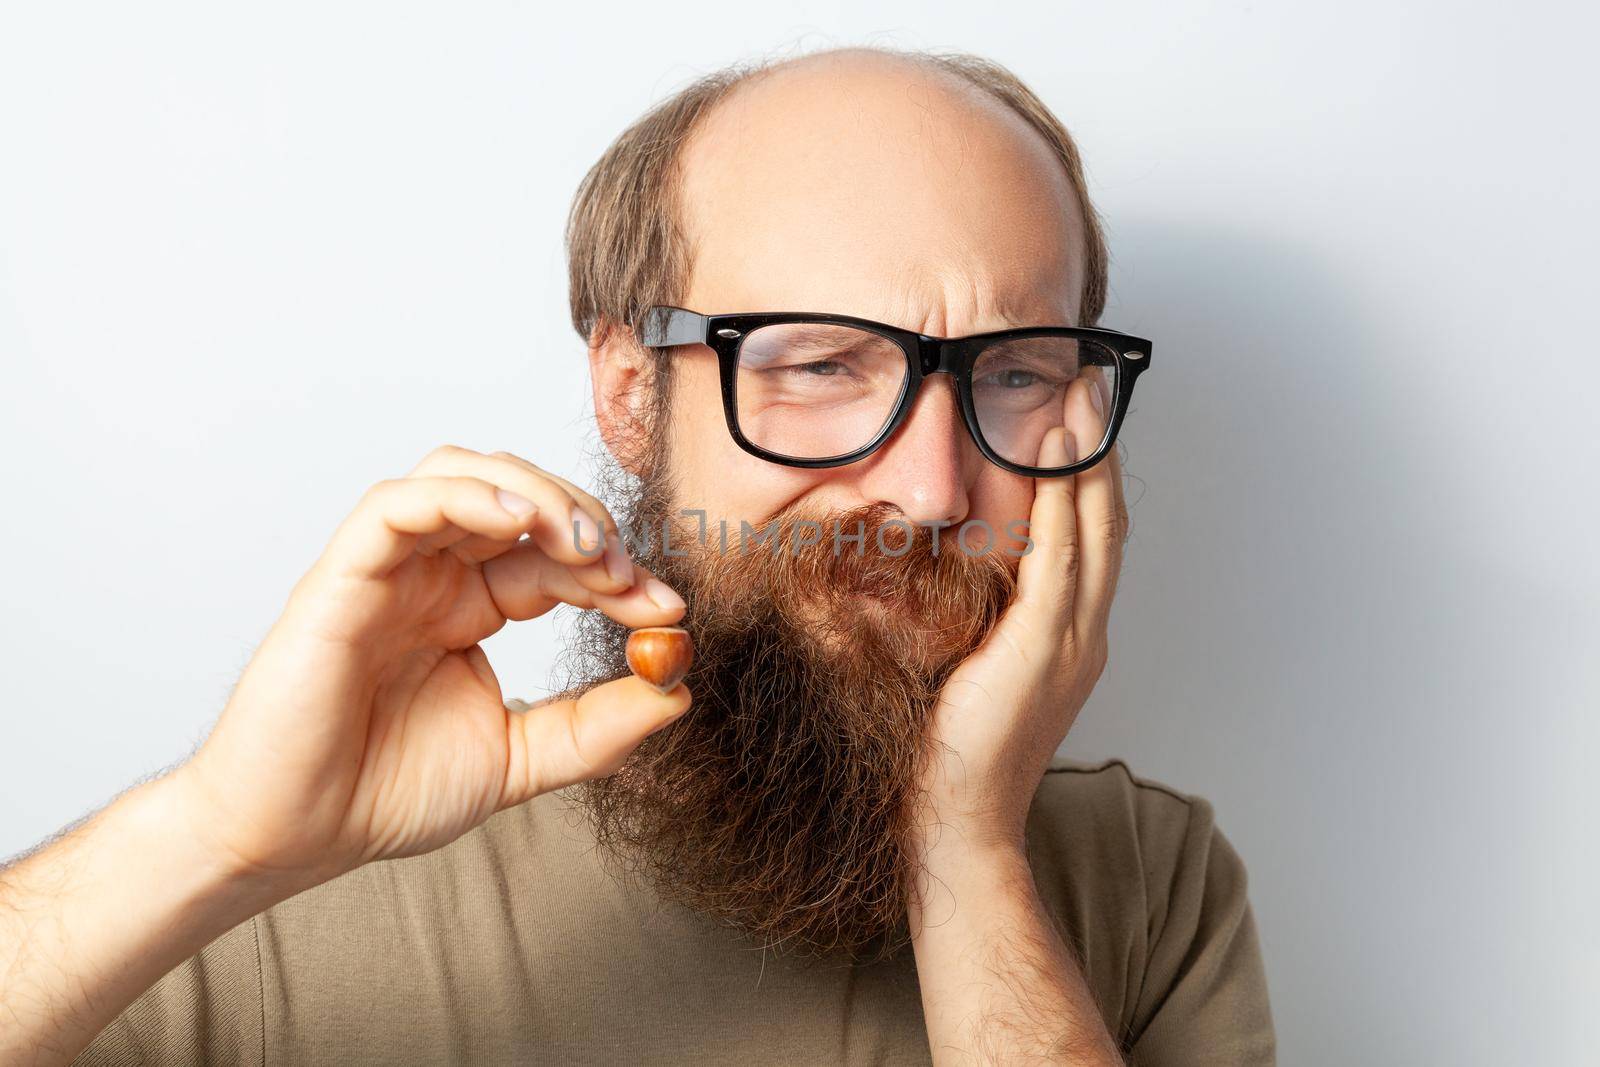 Portrait of unhealthy male suffering terrible toothache after cracking hazel, needs dental treatment, bald bearded man wearing T-shirt and glasses. Indoor studio shot isolated on gray background.